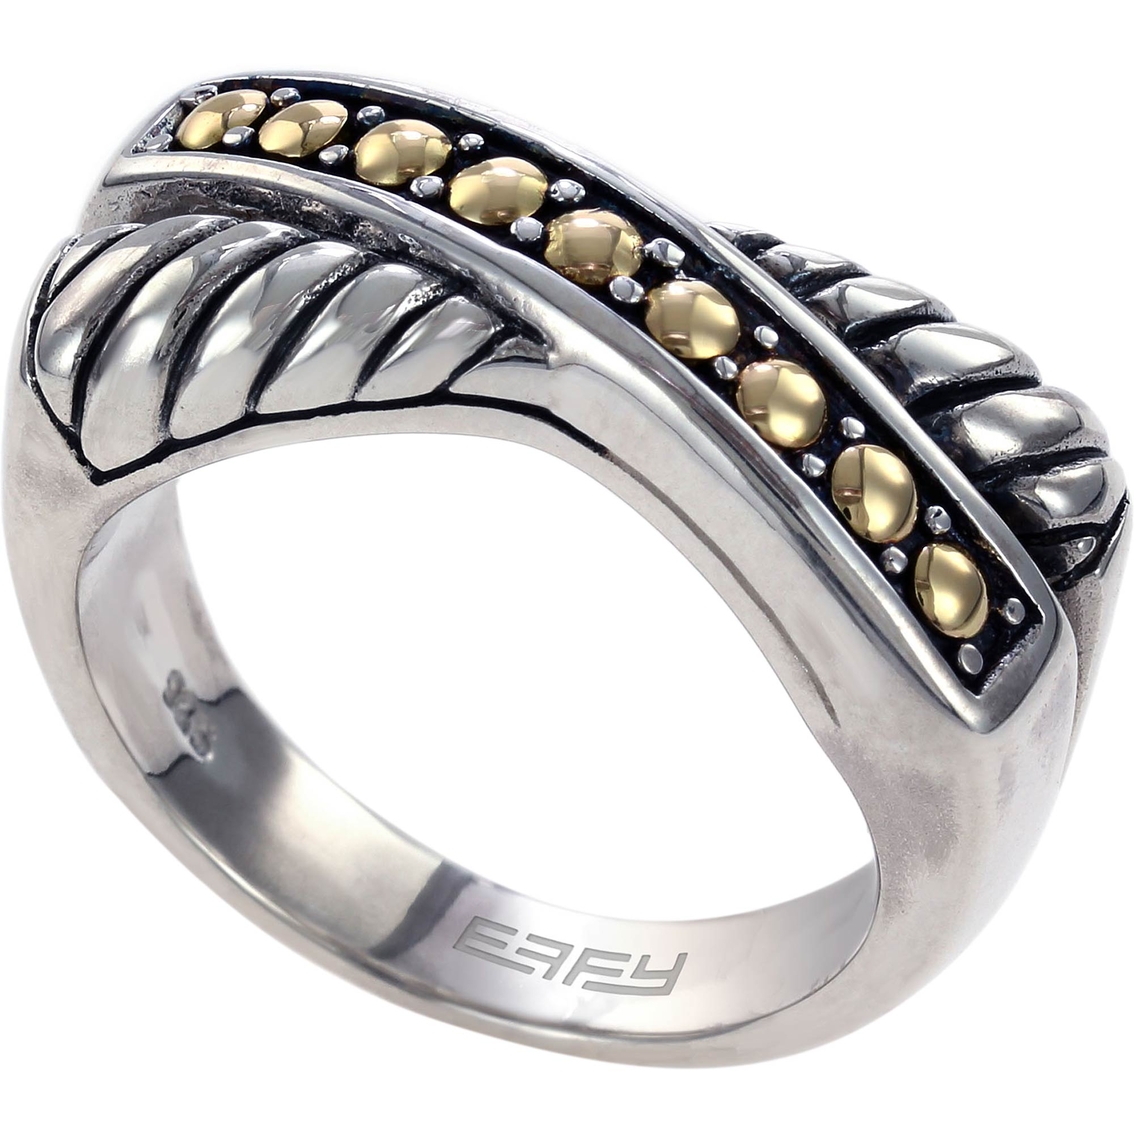 Effy Classic Sterling Silver And 18k Yellow Gold Ring, Size 7 Jewelry